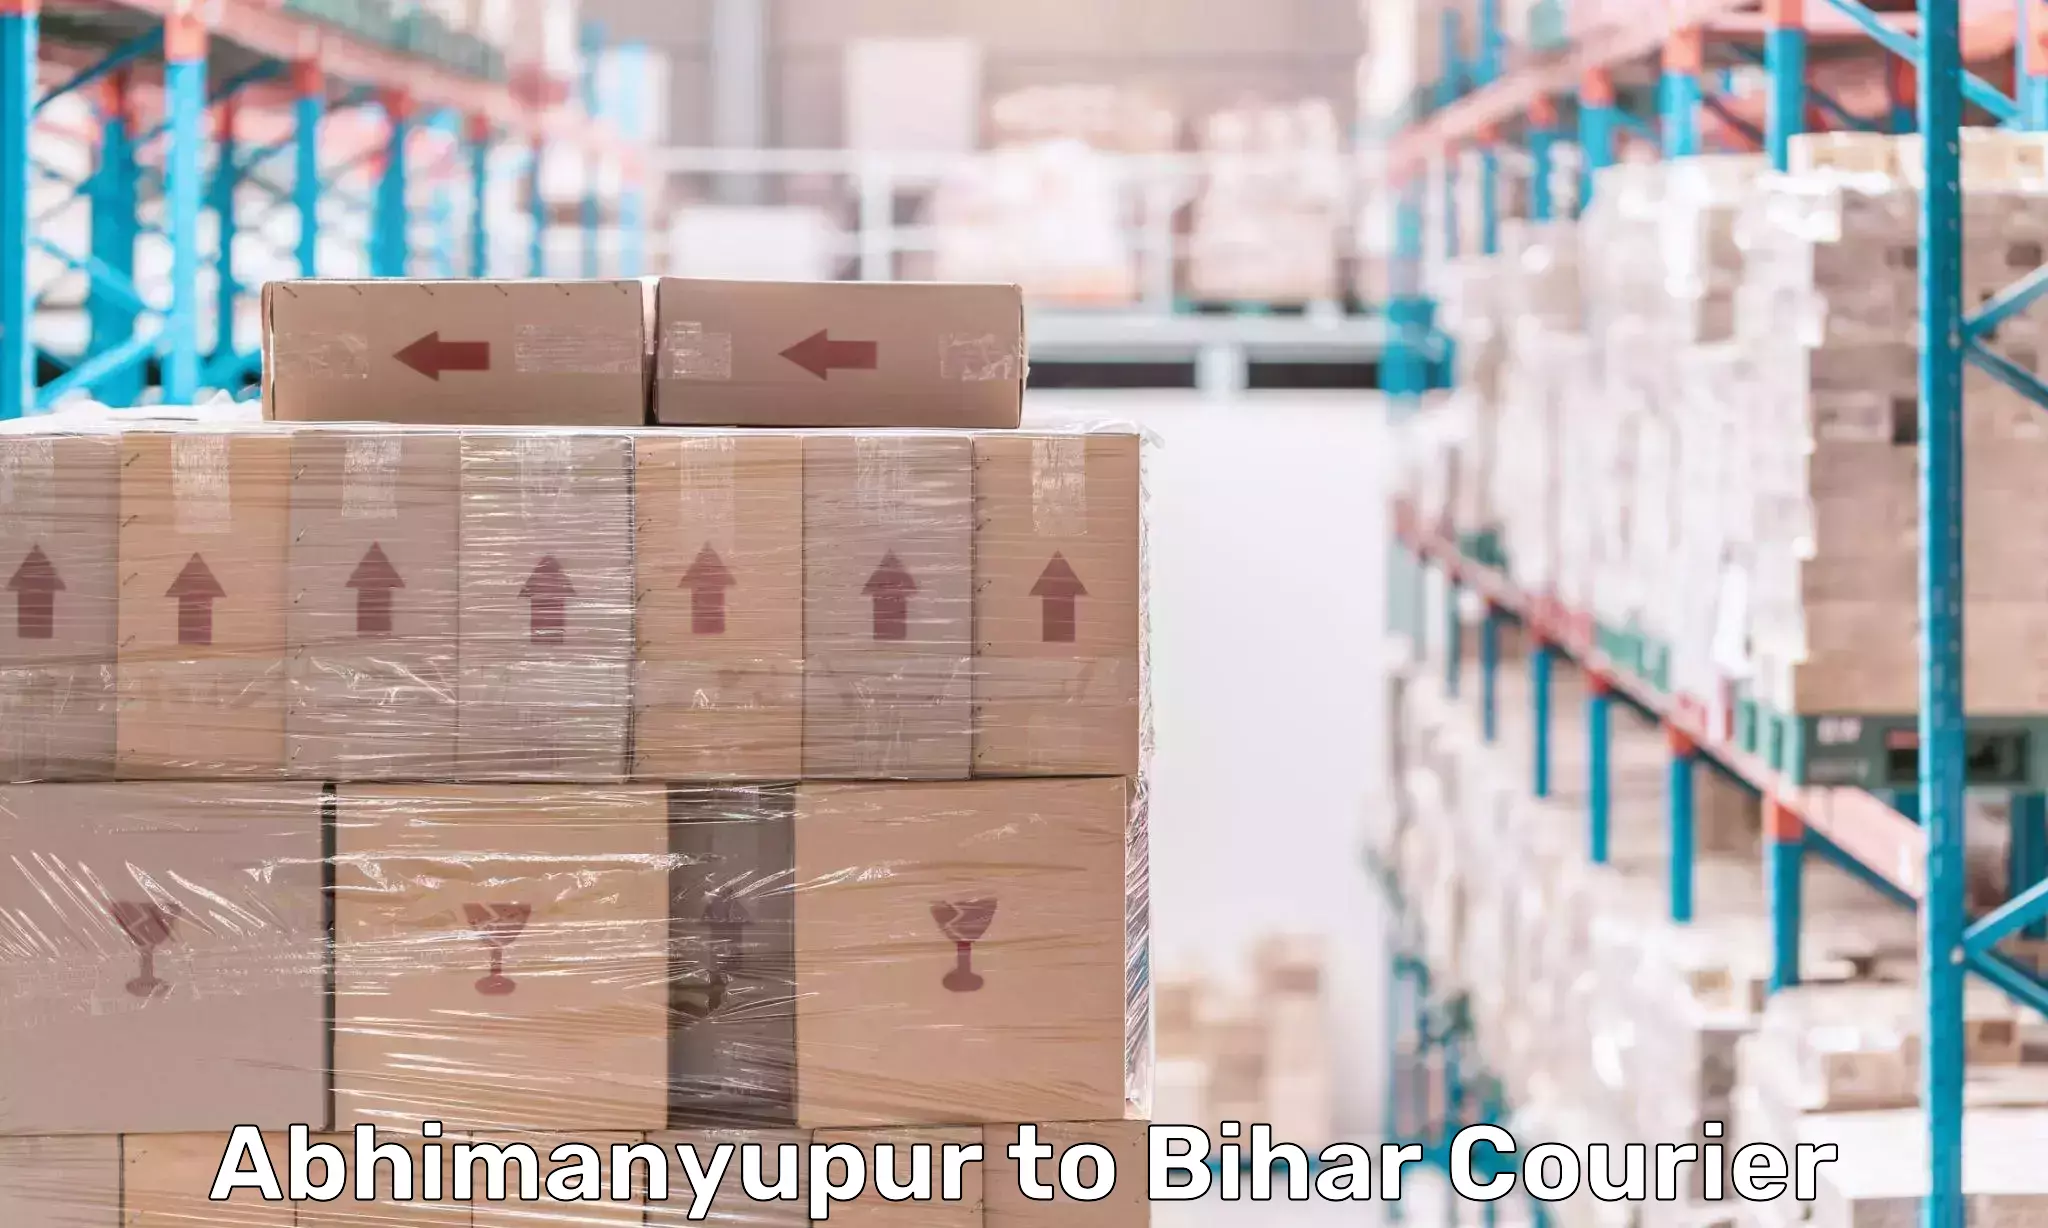 State-of-the-art courier technology Abhimanyupur to Dumraon